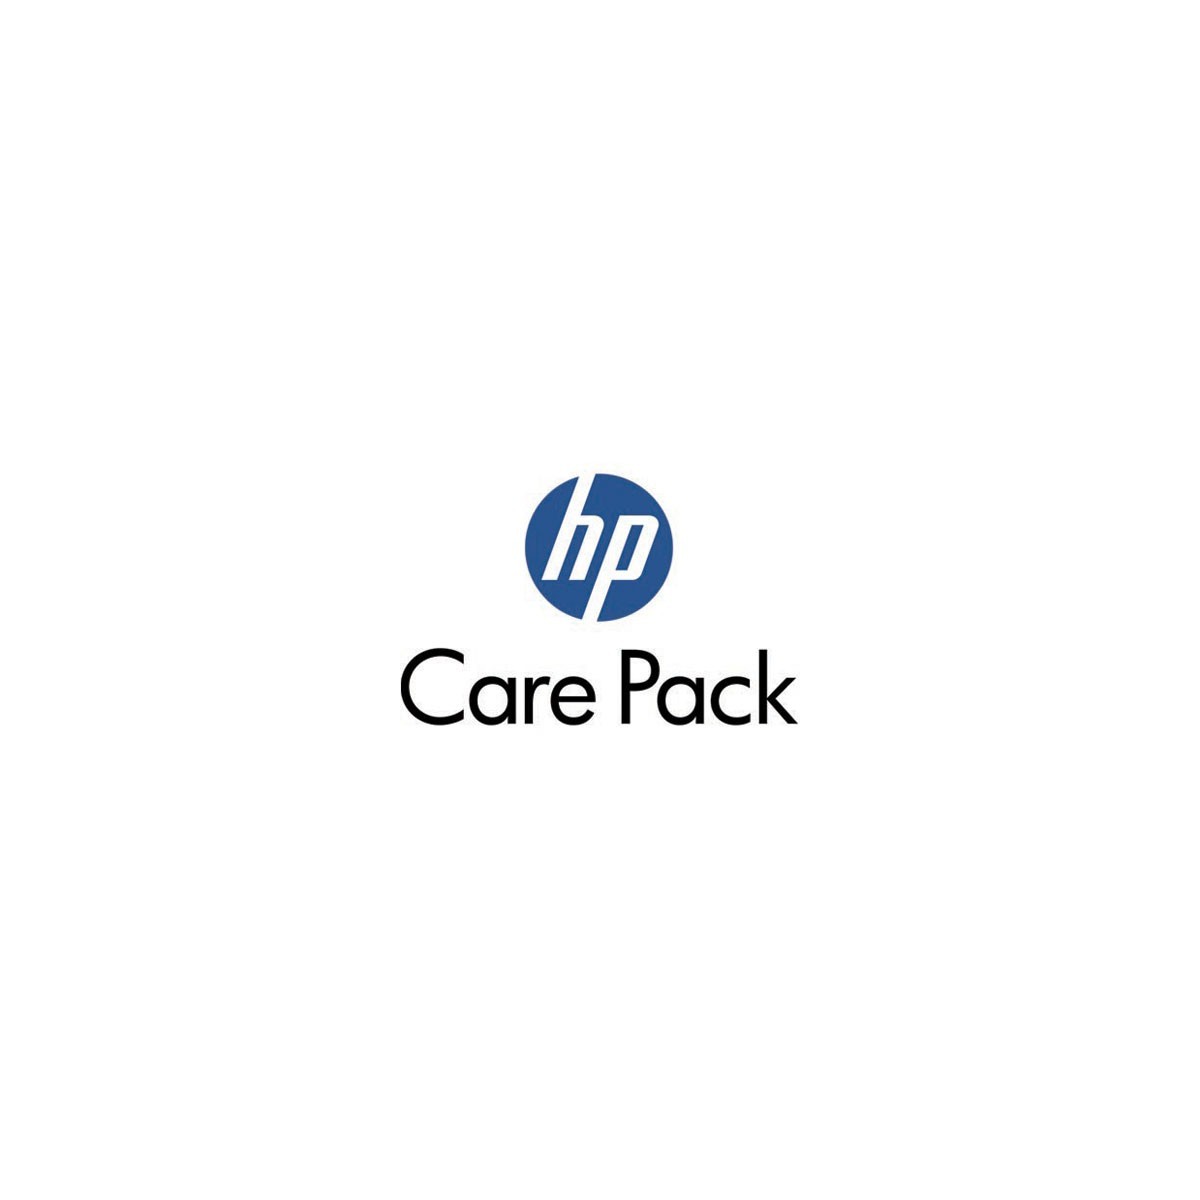 HPE Care Pack Electronic HP Care Pack Installation and Startup - Systems Service  Support